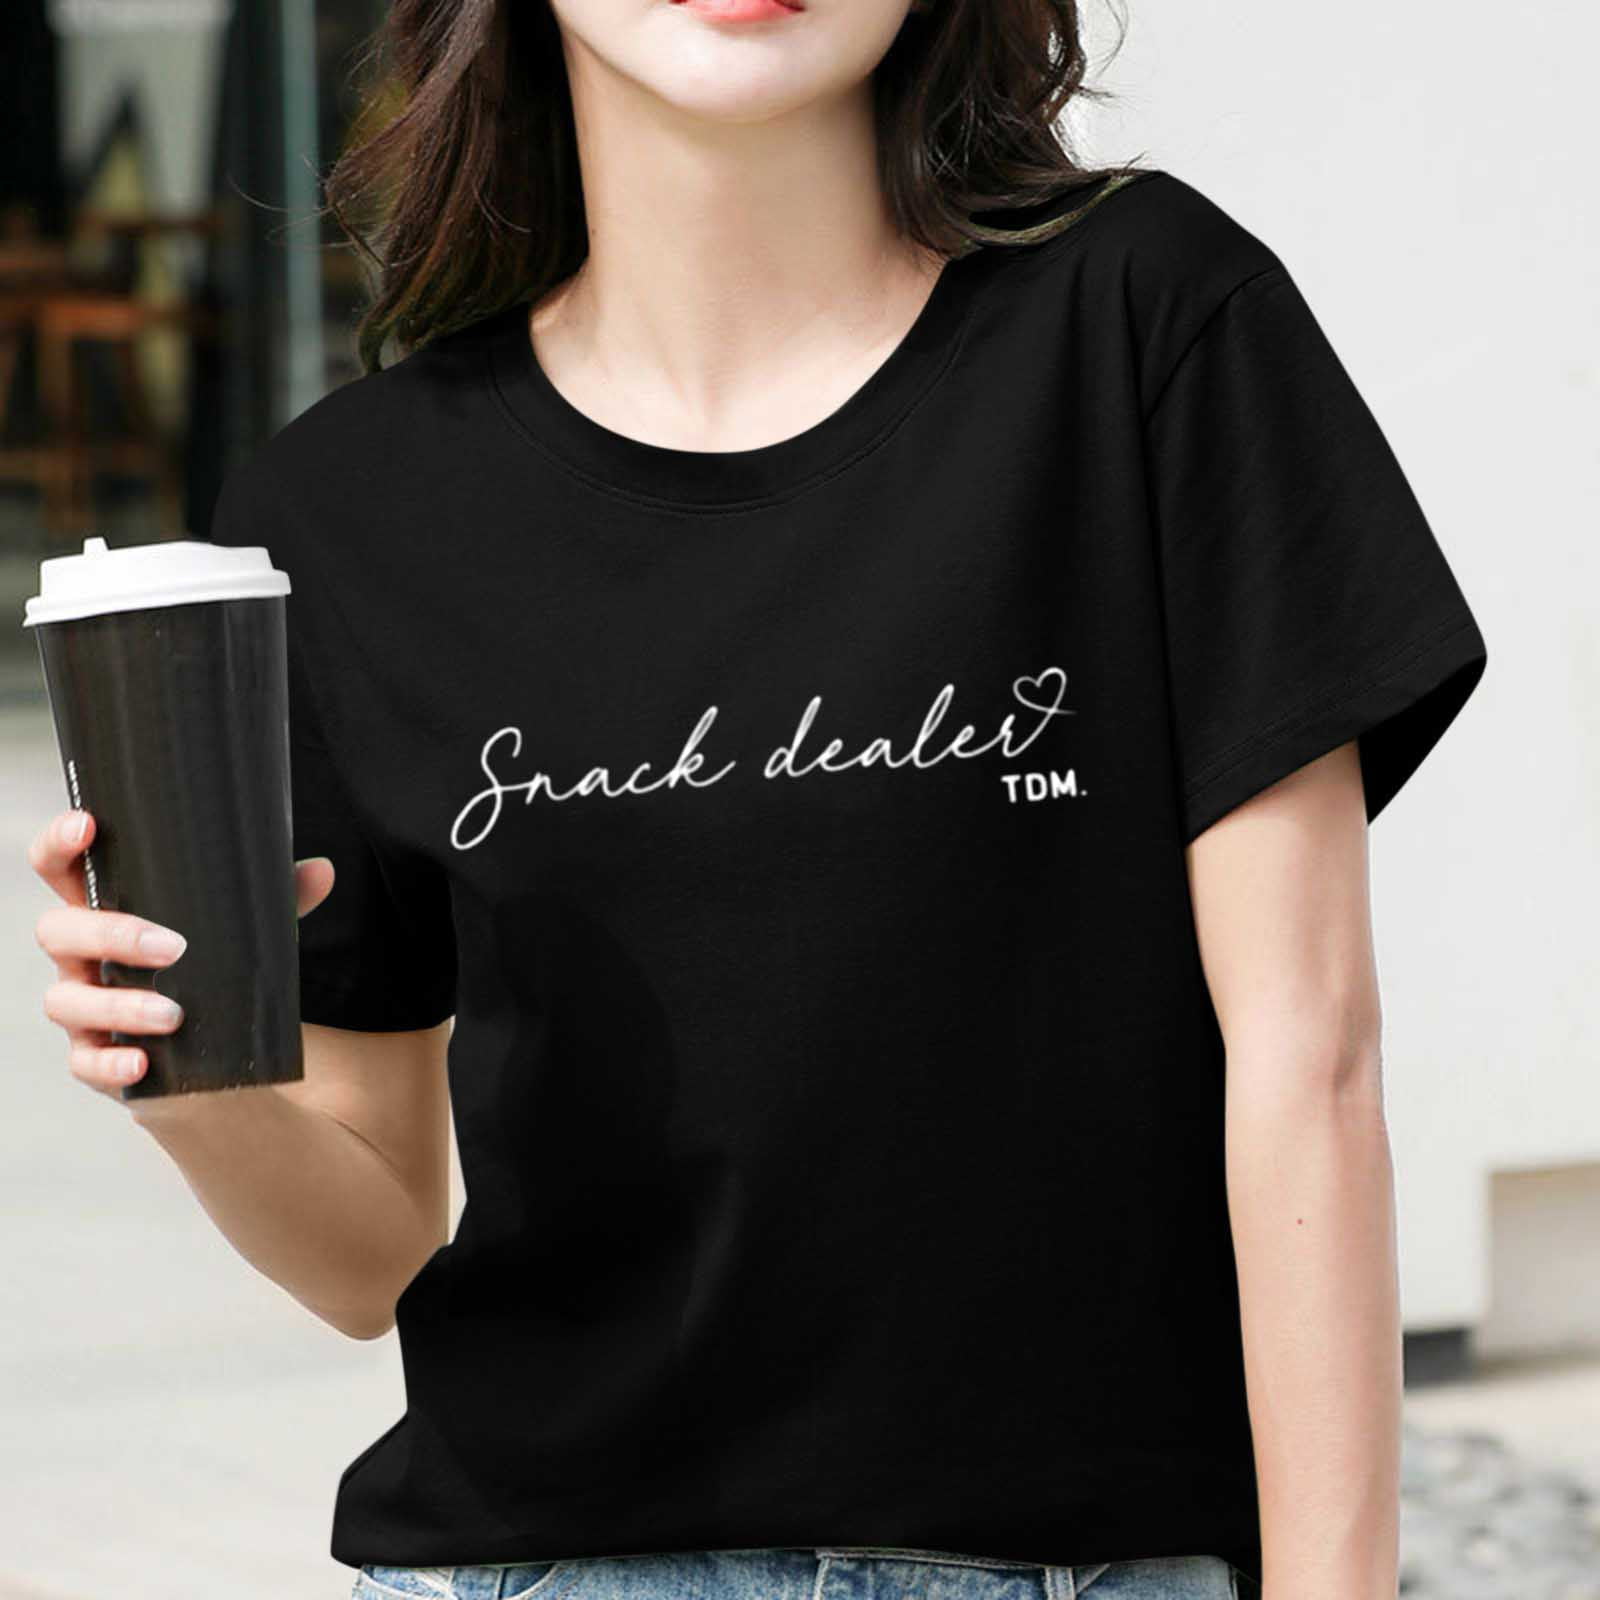 Women's Casual Neck T Shirt Letter Pattern Tees Loose Stylish Tops Flower Printed T Shirts Short Sleeve Blouse For Women Lightweight Quickly Dry Shirt - Walmart.com